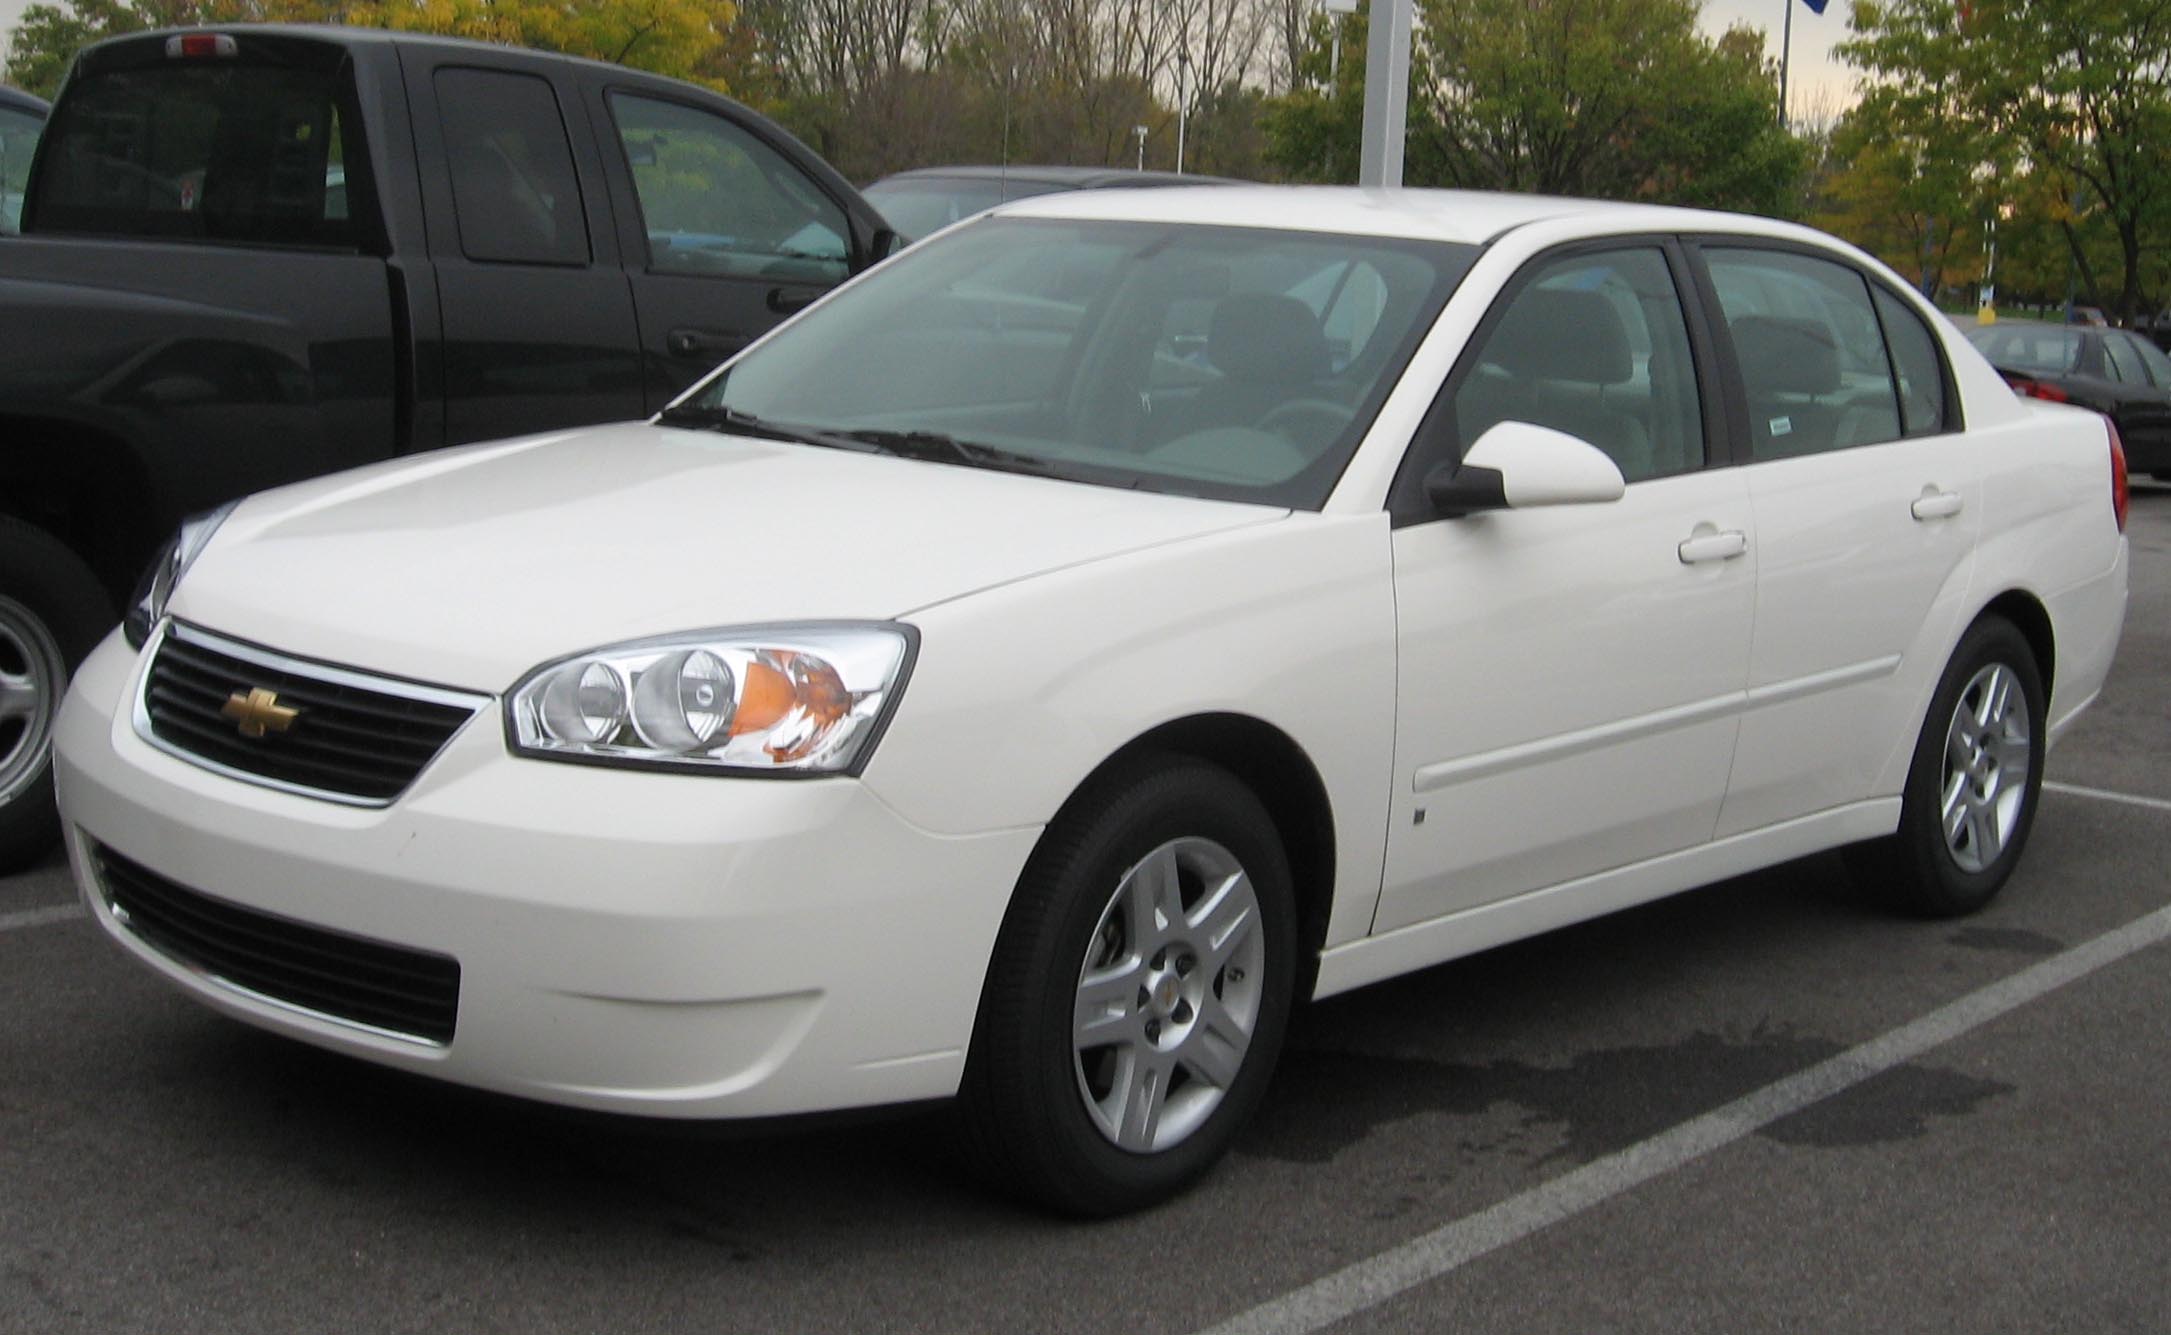 2008 Chevrolet Malibu Classic - Information and photos - Neo Drive